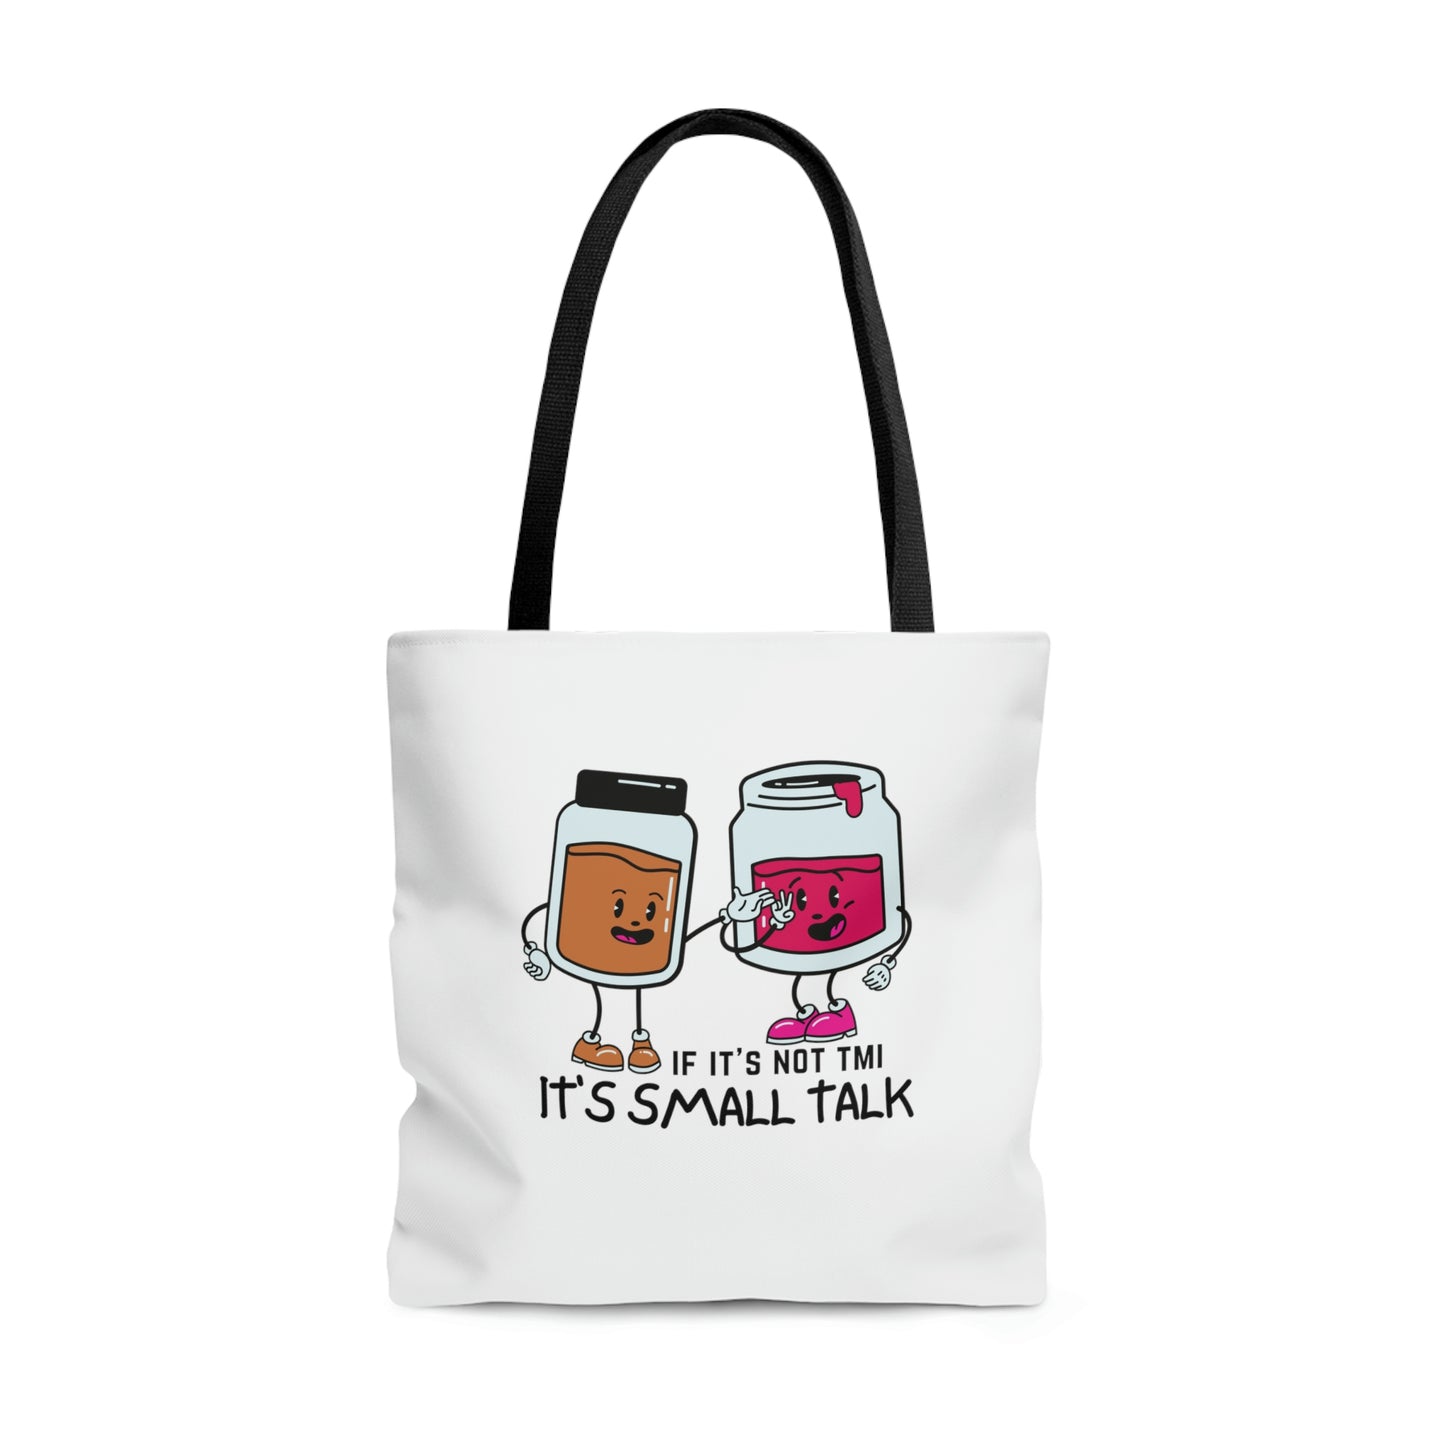 "If It's Not TMI, It's Small Talk" Tote Bag in 3 sizes